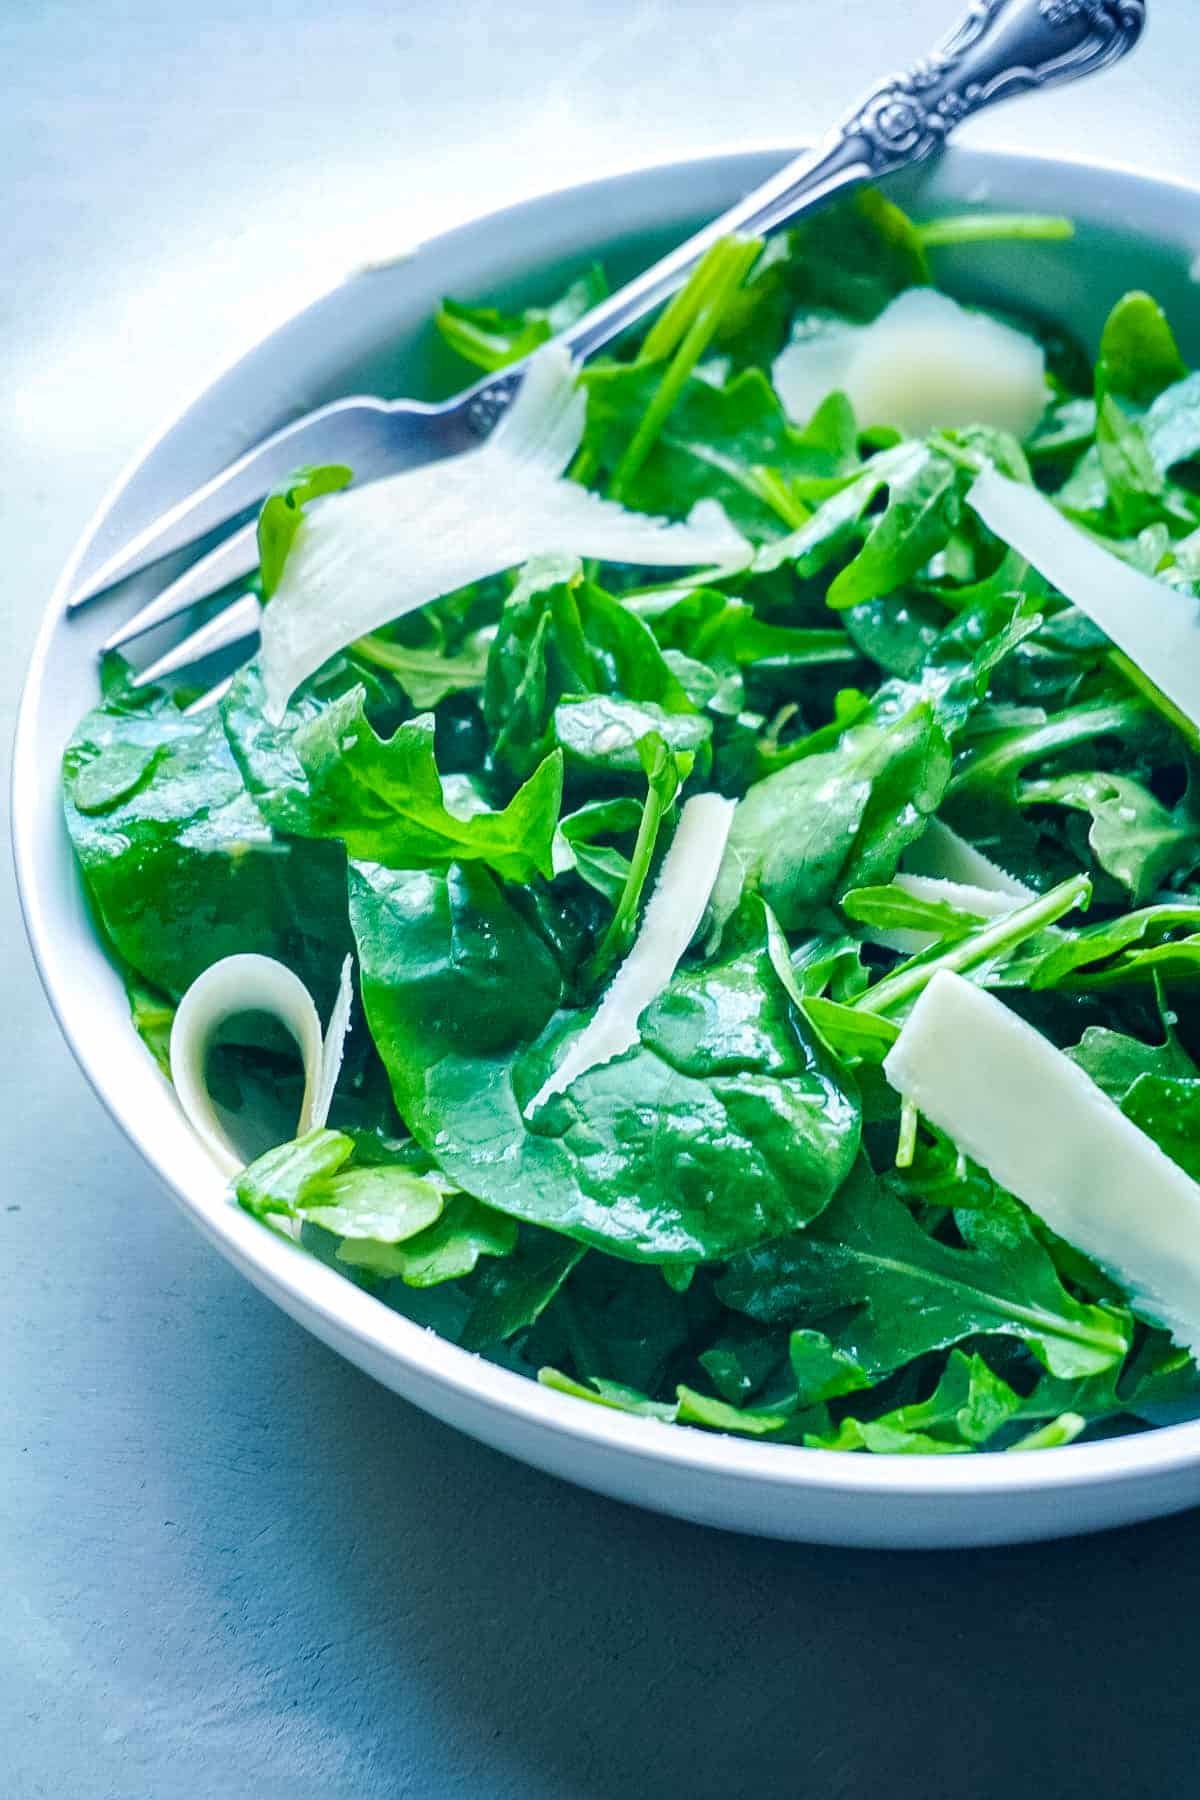 A simple arugula salad with Parmesan Dressing over it.